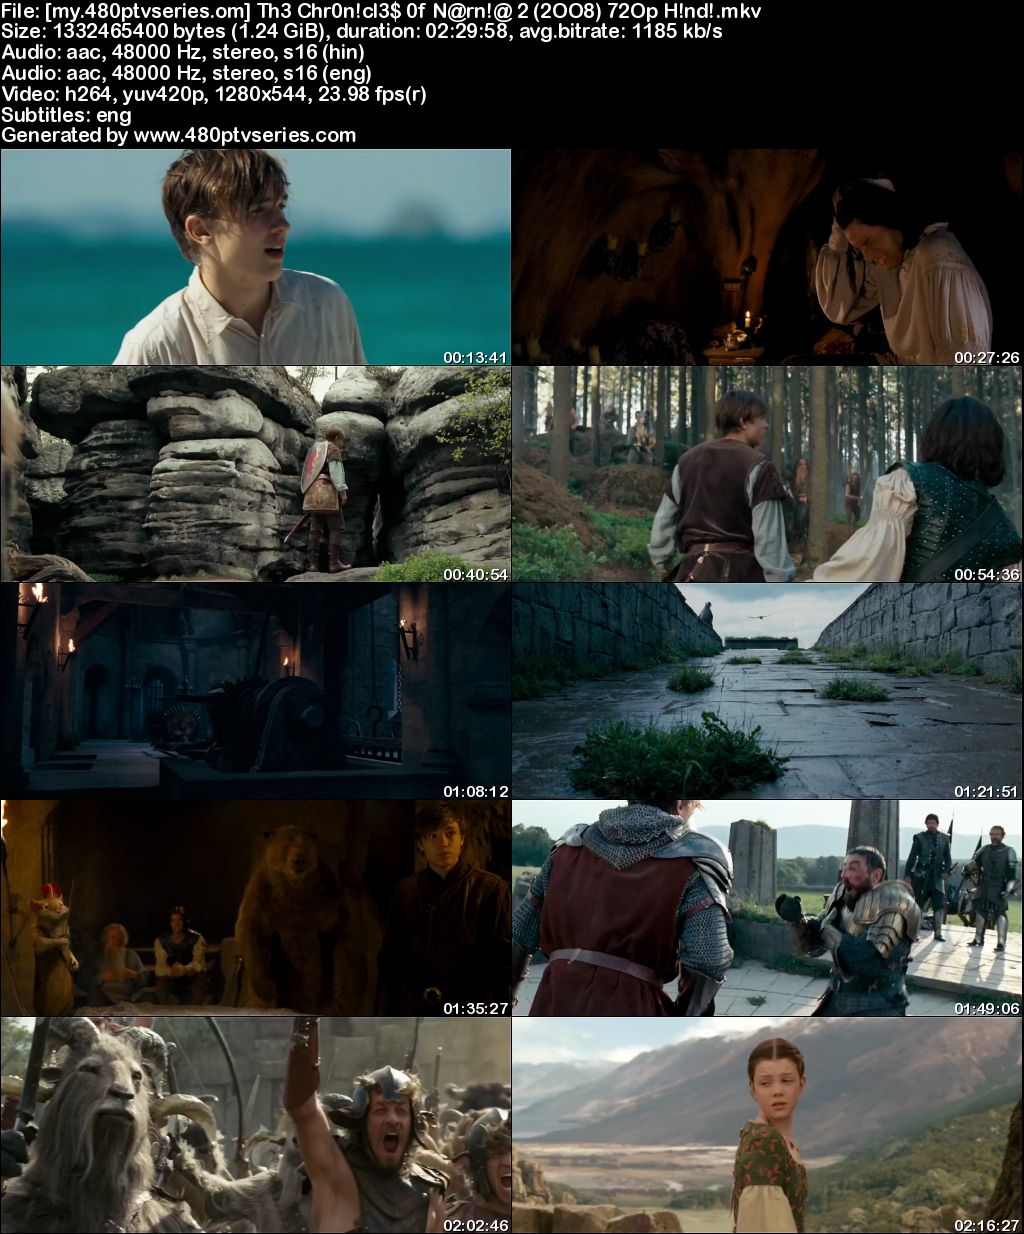 Download The Chronicles of Narnia: Prince Caspian (2008) Full Hindi Dual Audio Movie Download 720p Bluray Free Watch Online Full Movie Download Worldfree4u 9xmovies